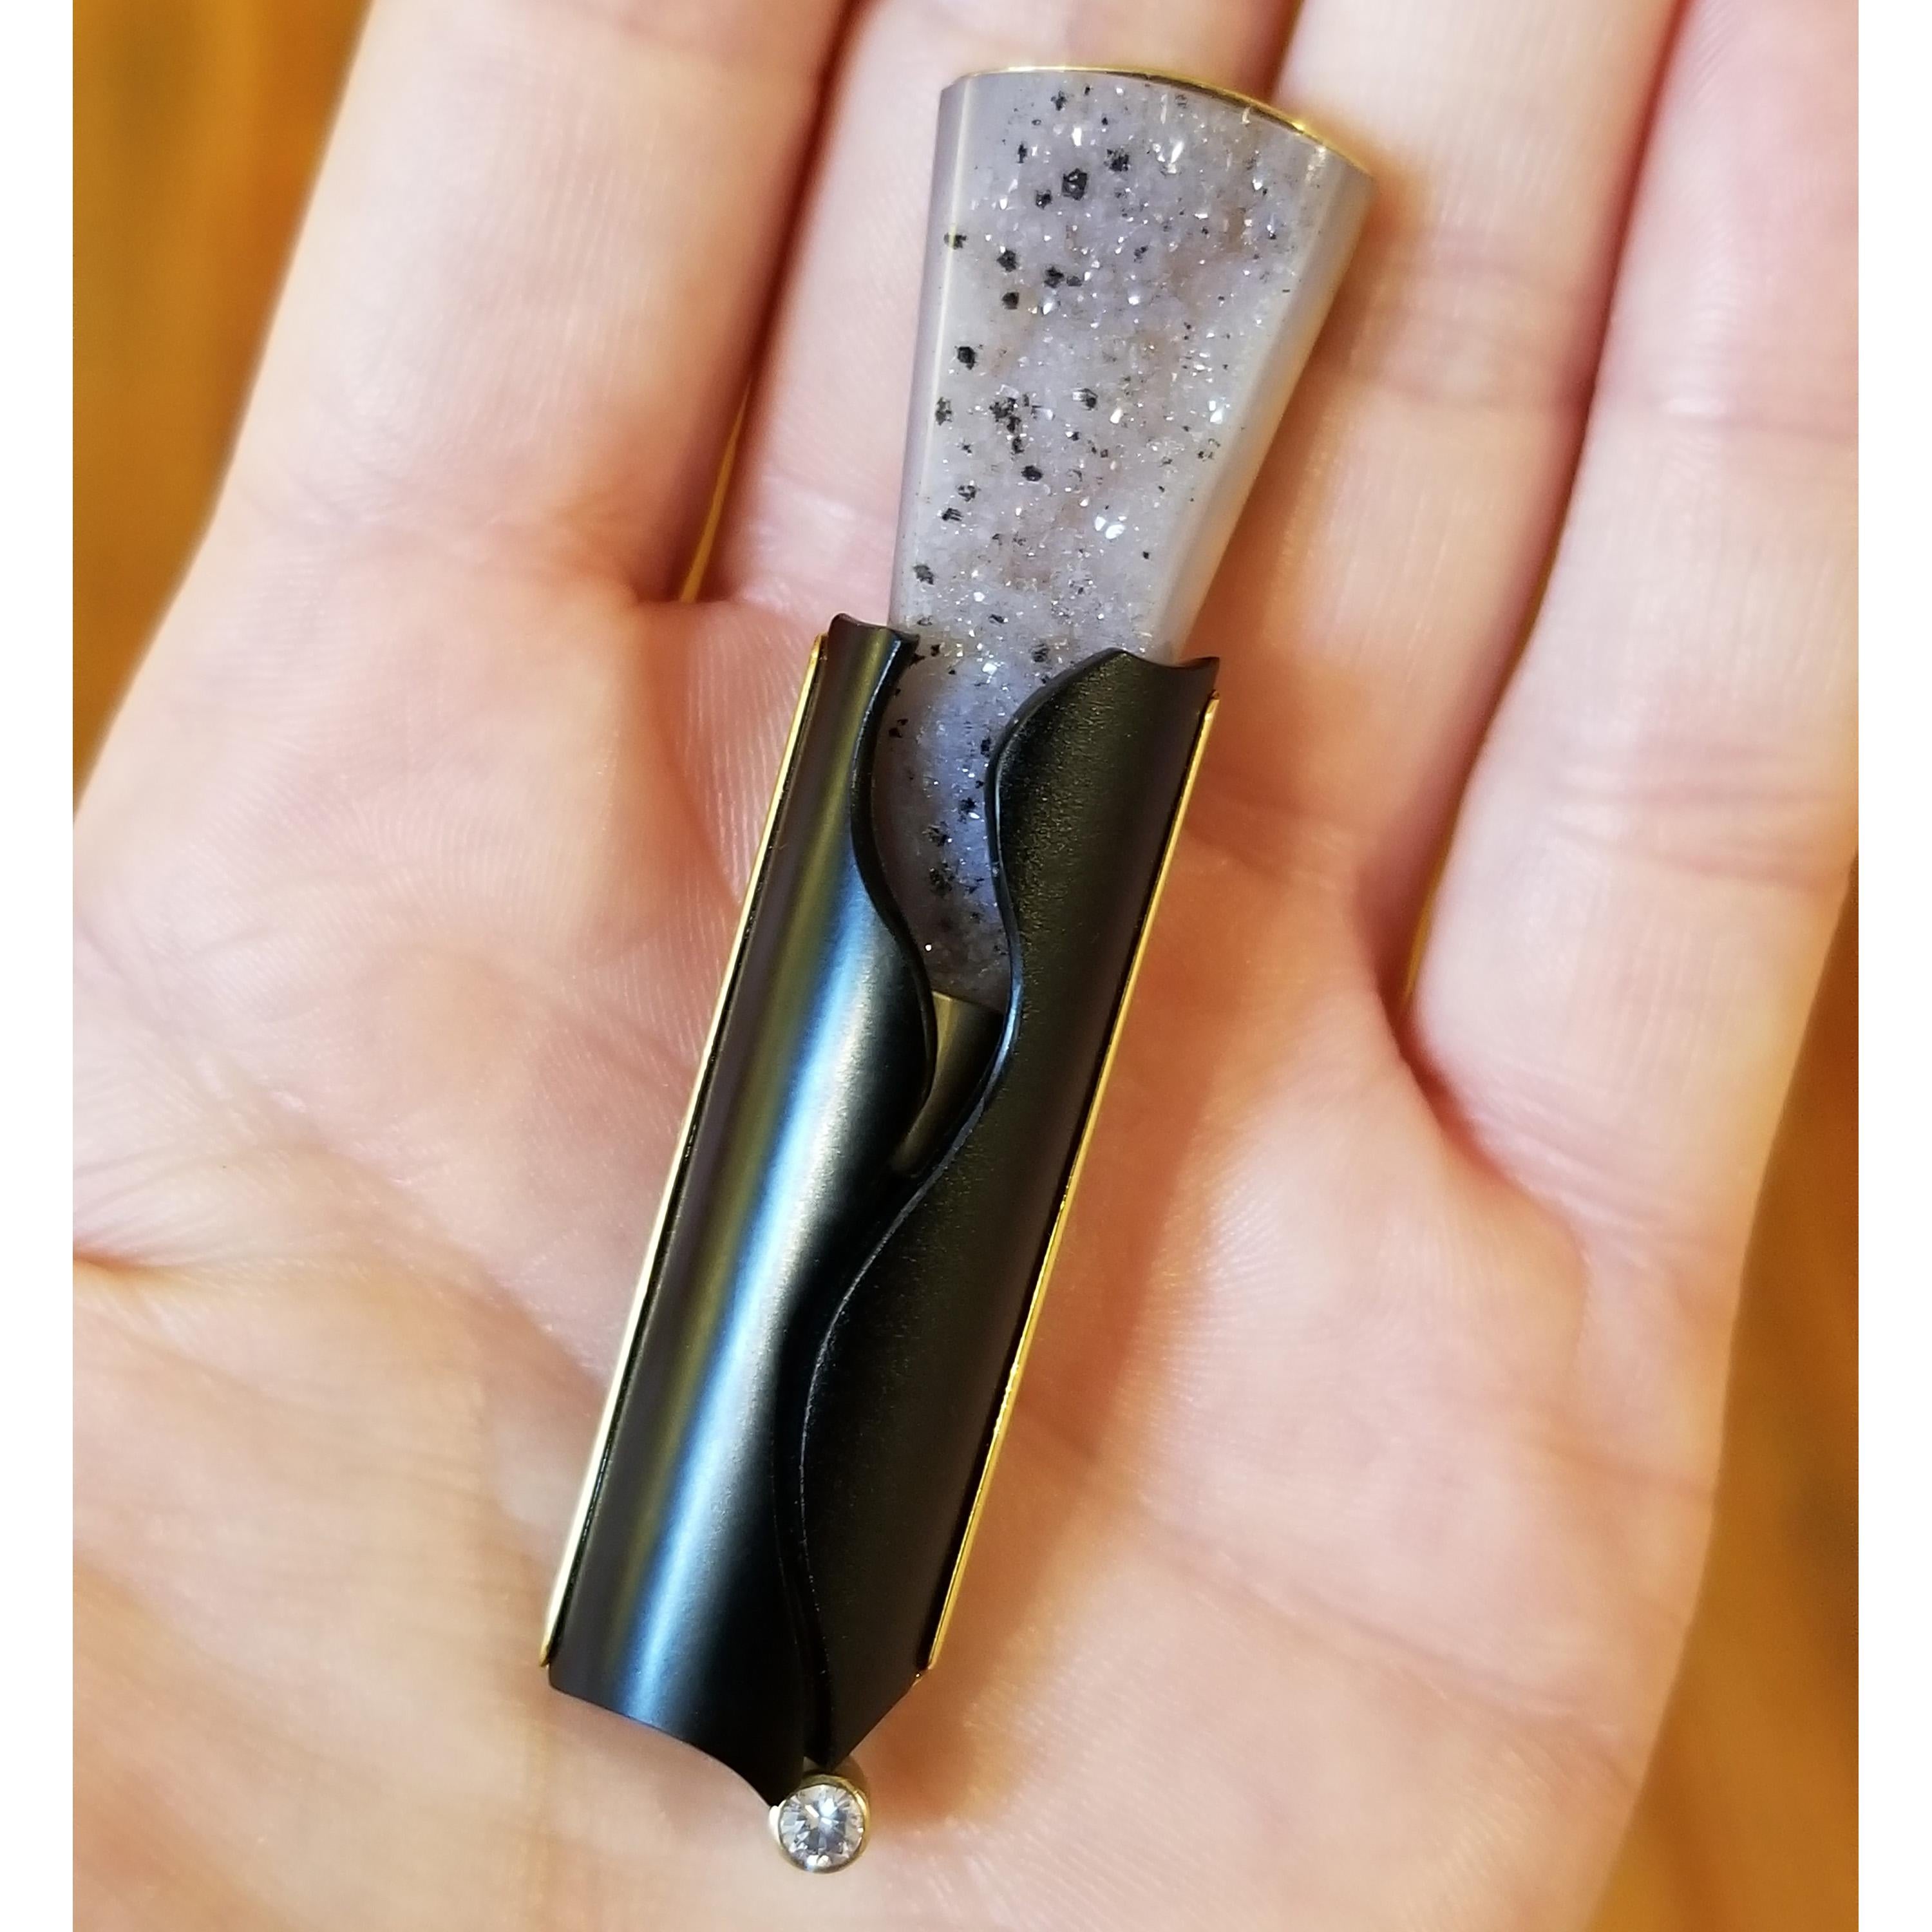 This elegant torch is a stunning combination of exquisitely carved and polished natural black chalcedony with natural and raw amethystine silica drusy. This piece is a study in textural contrasts.

Steve Walters, the renowned lapidary artist, carved